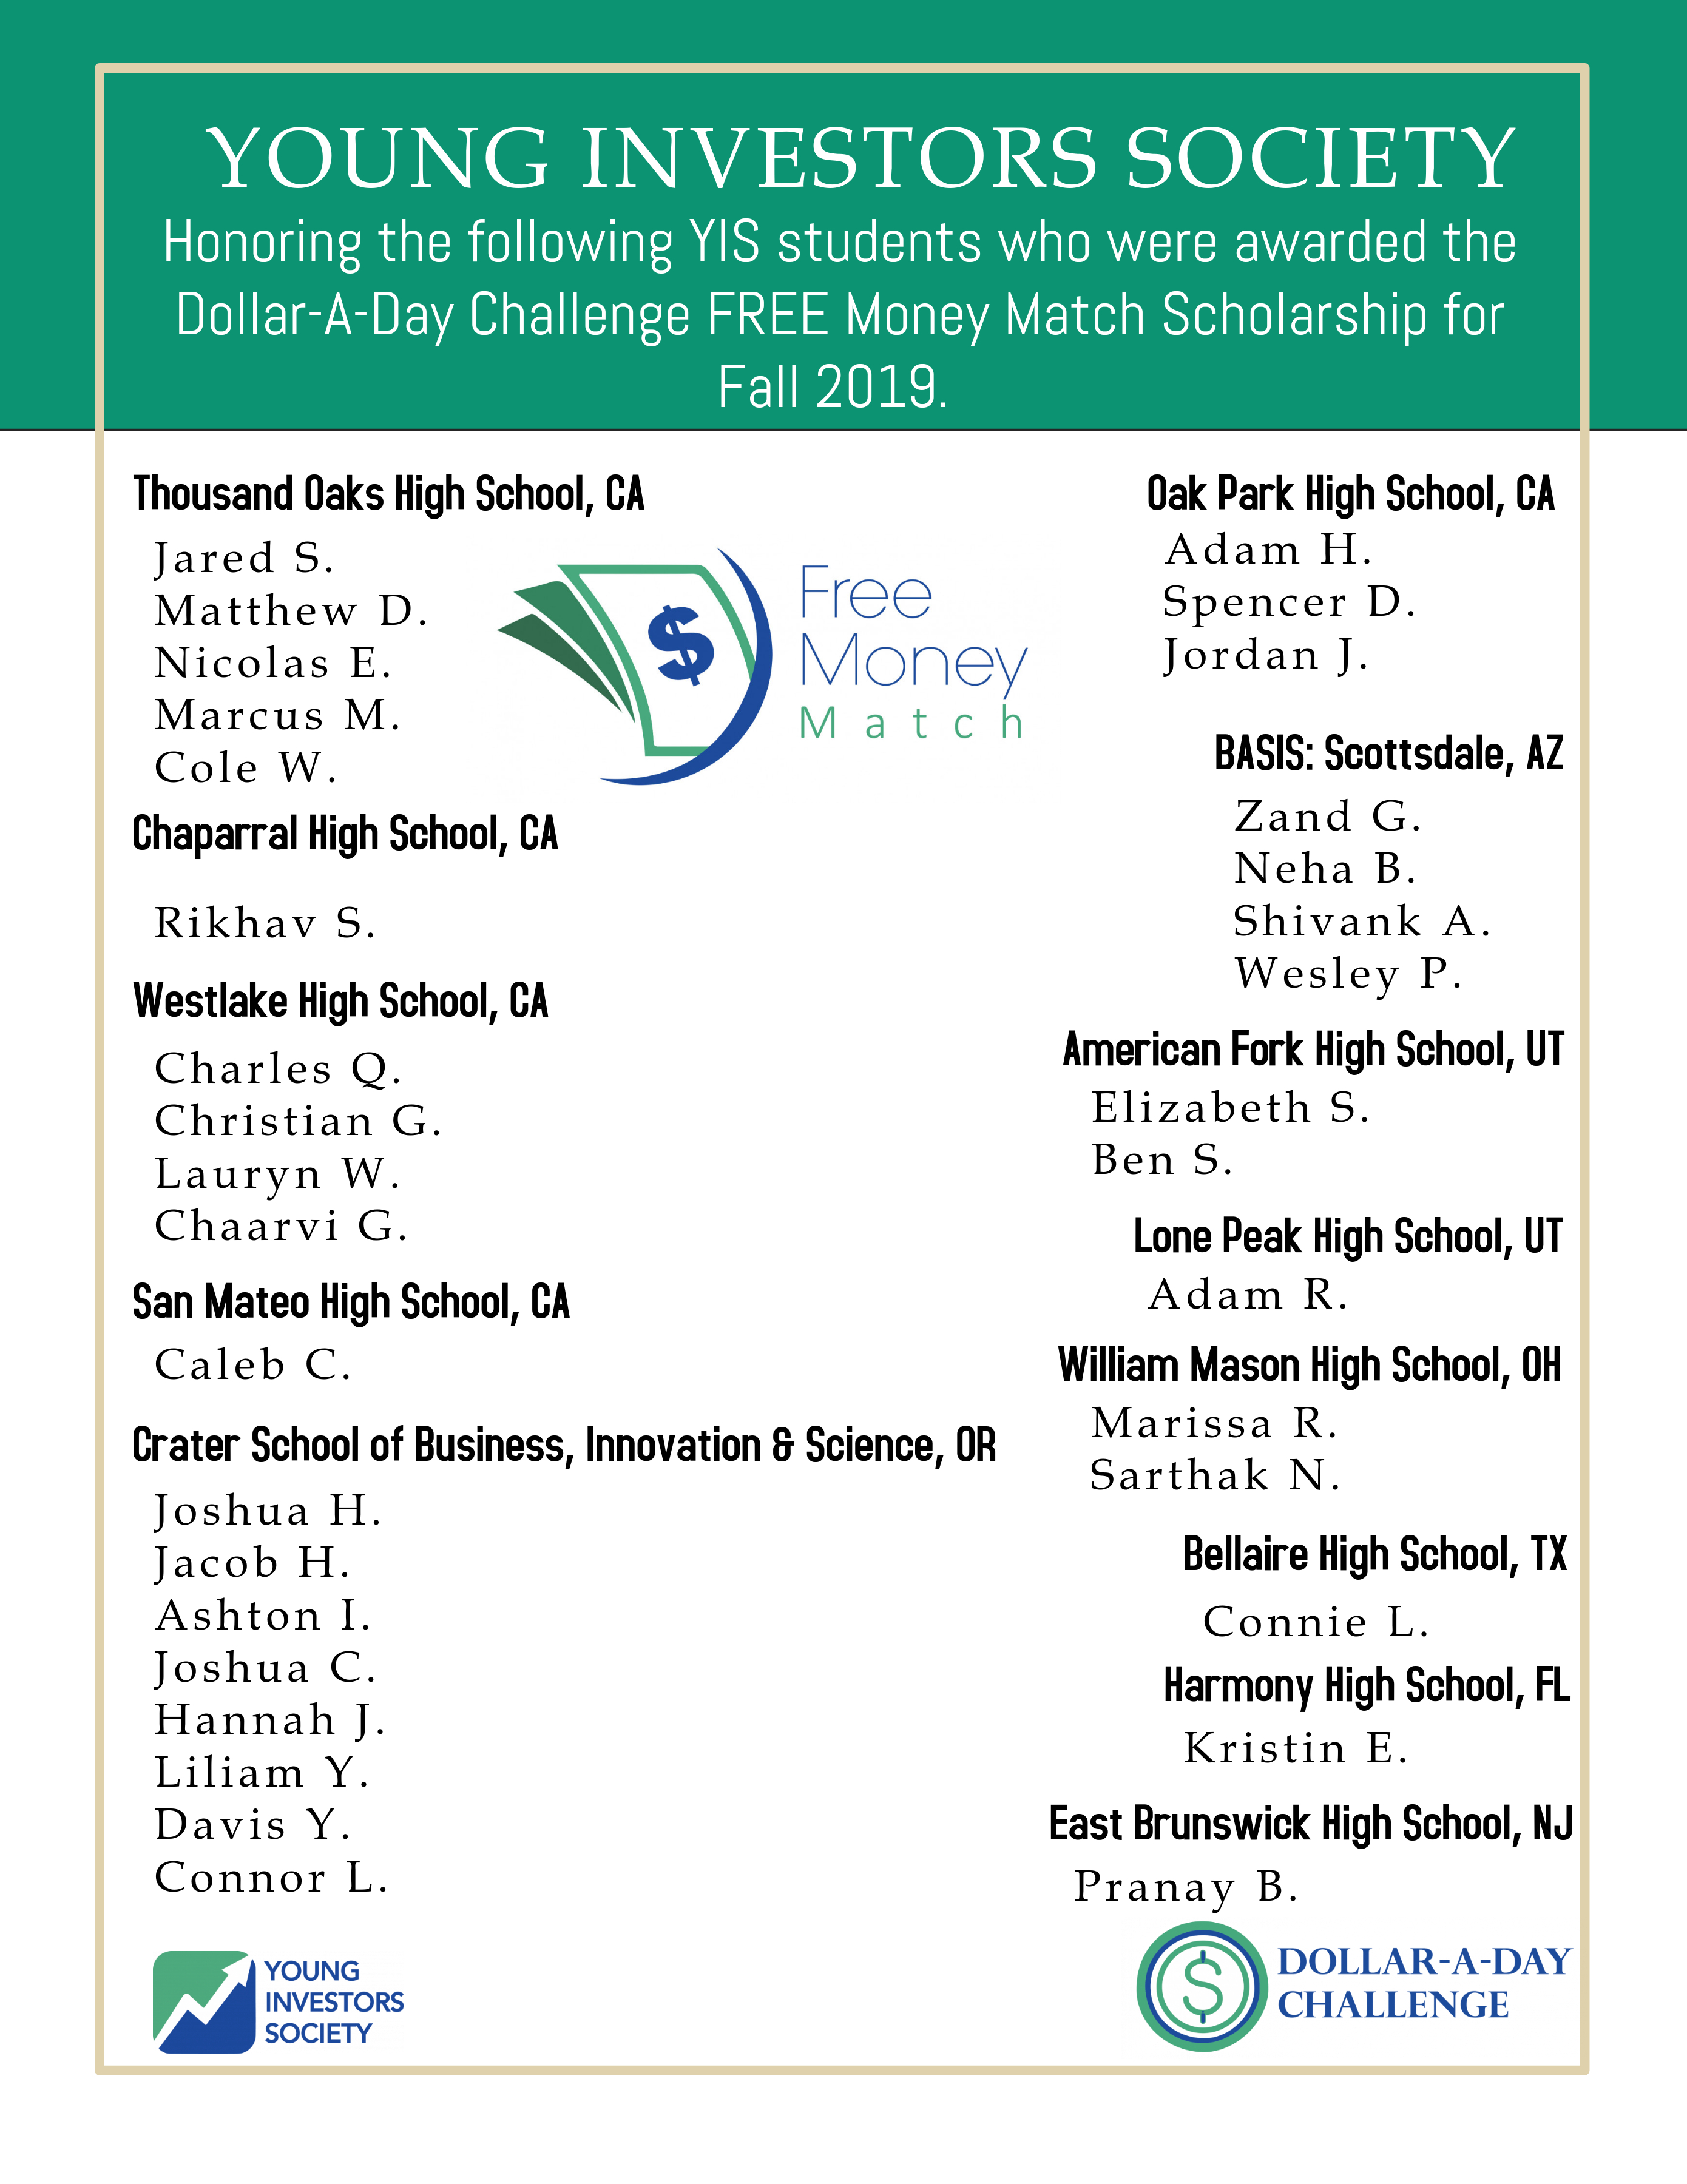 Congratulations to the Dollar-A-Day FREE Money March Scholarship Awardees for Fall 2019!